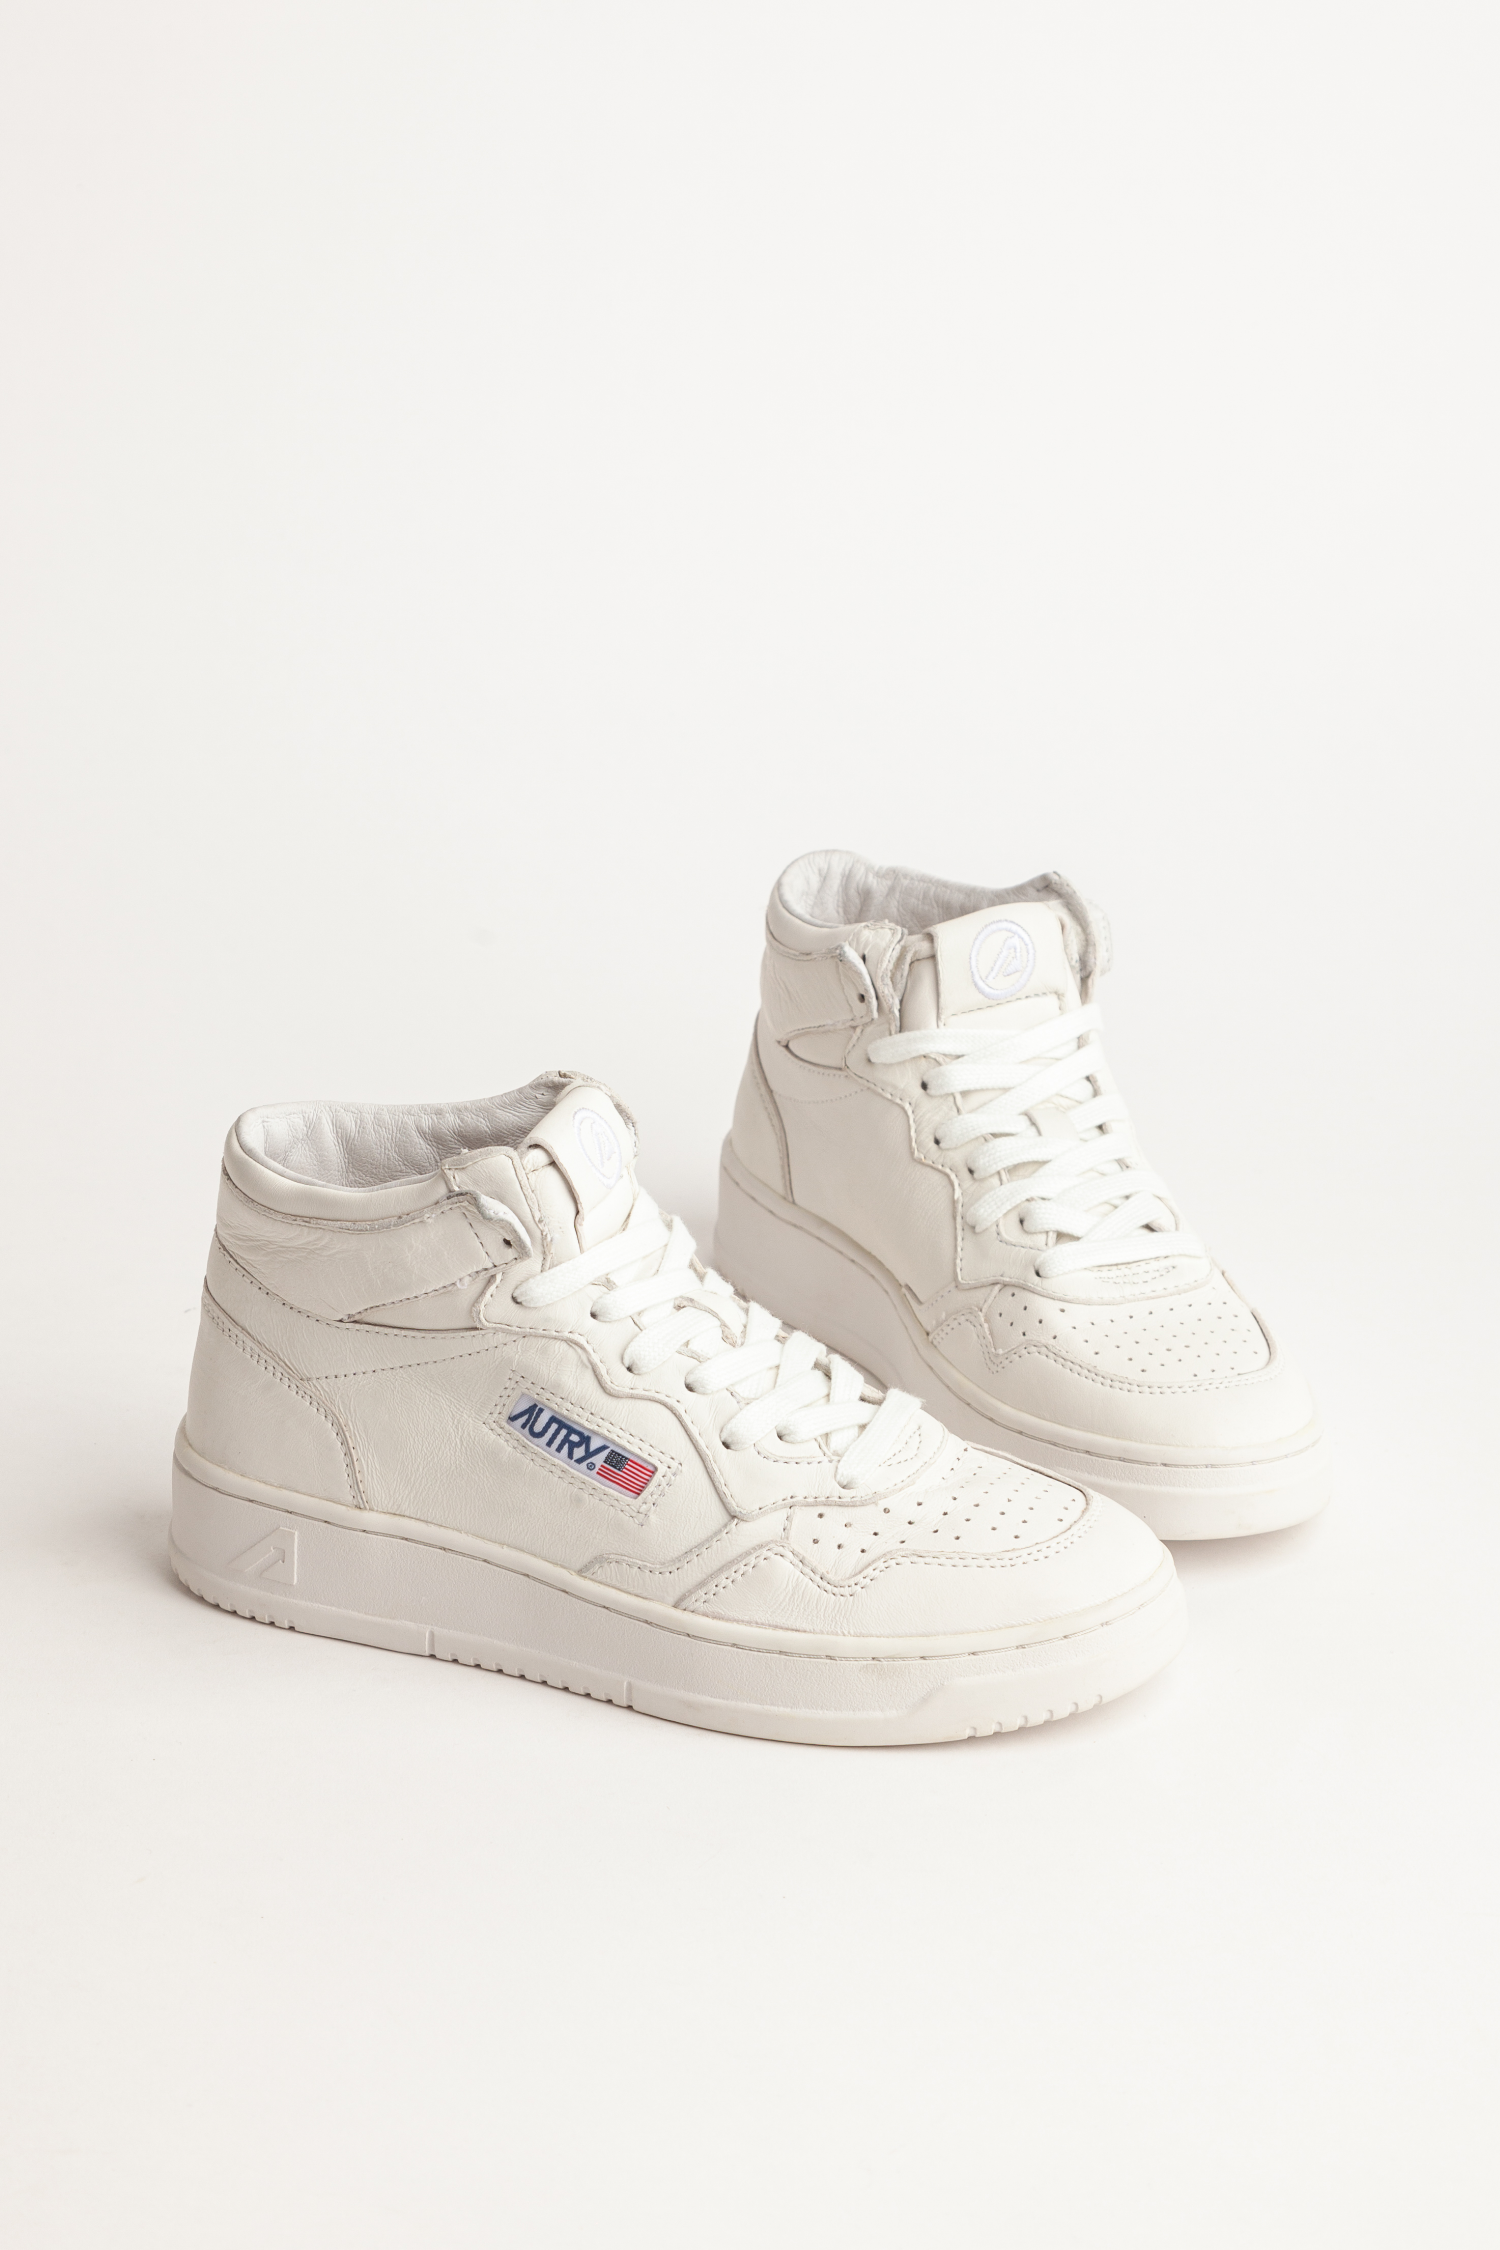 AUMW-SG10 - MEDALIST MID SNEAKERS IN SOFT GOATSKIN COLOR WHITE